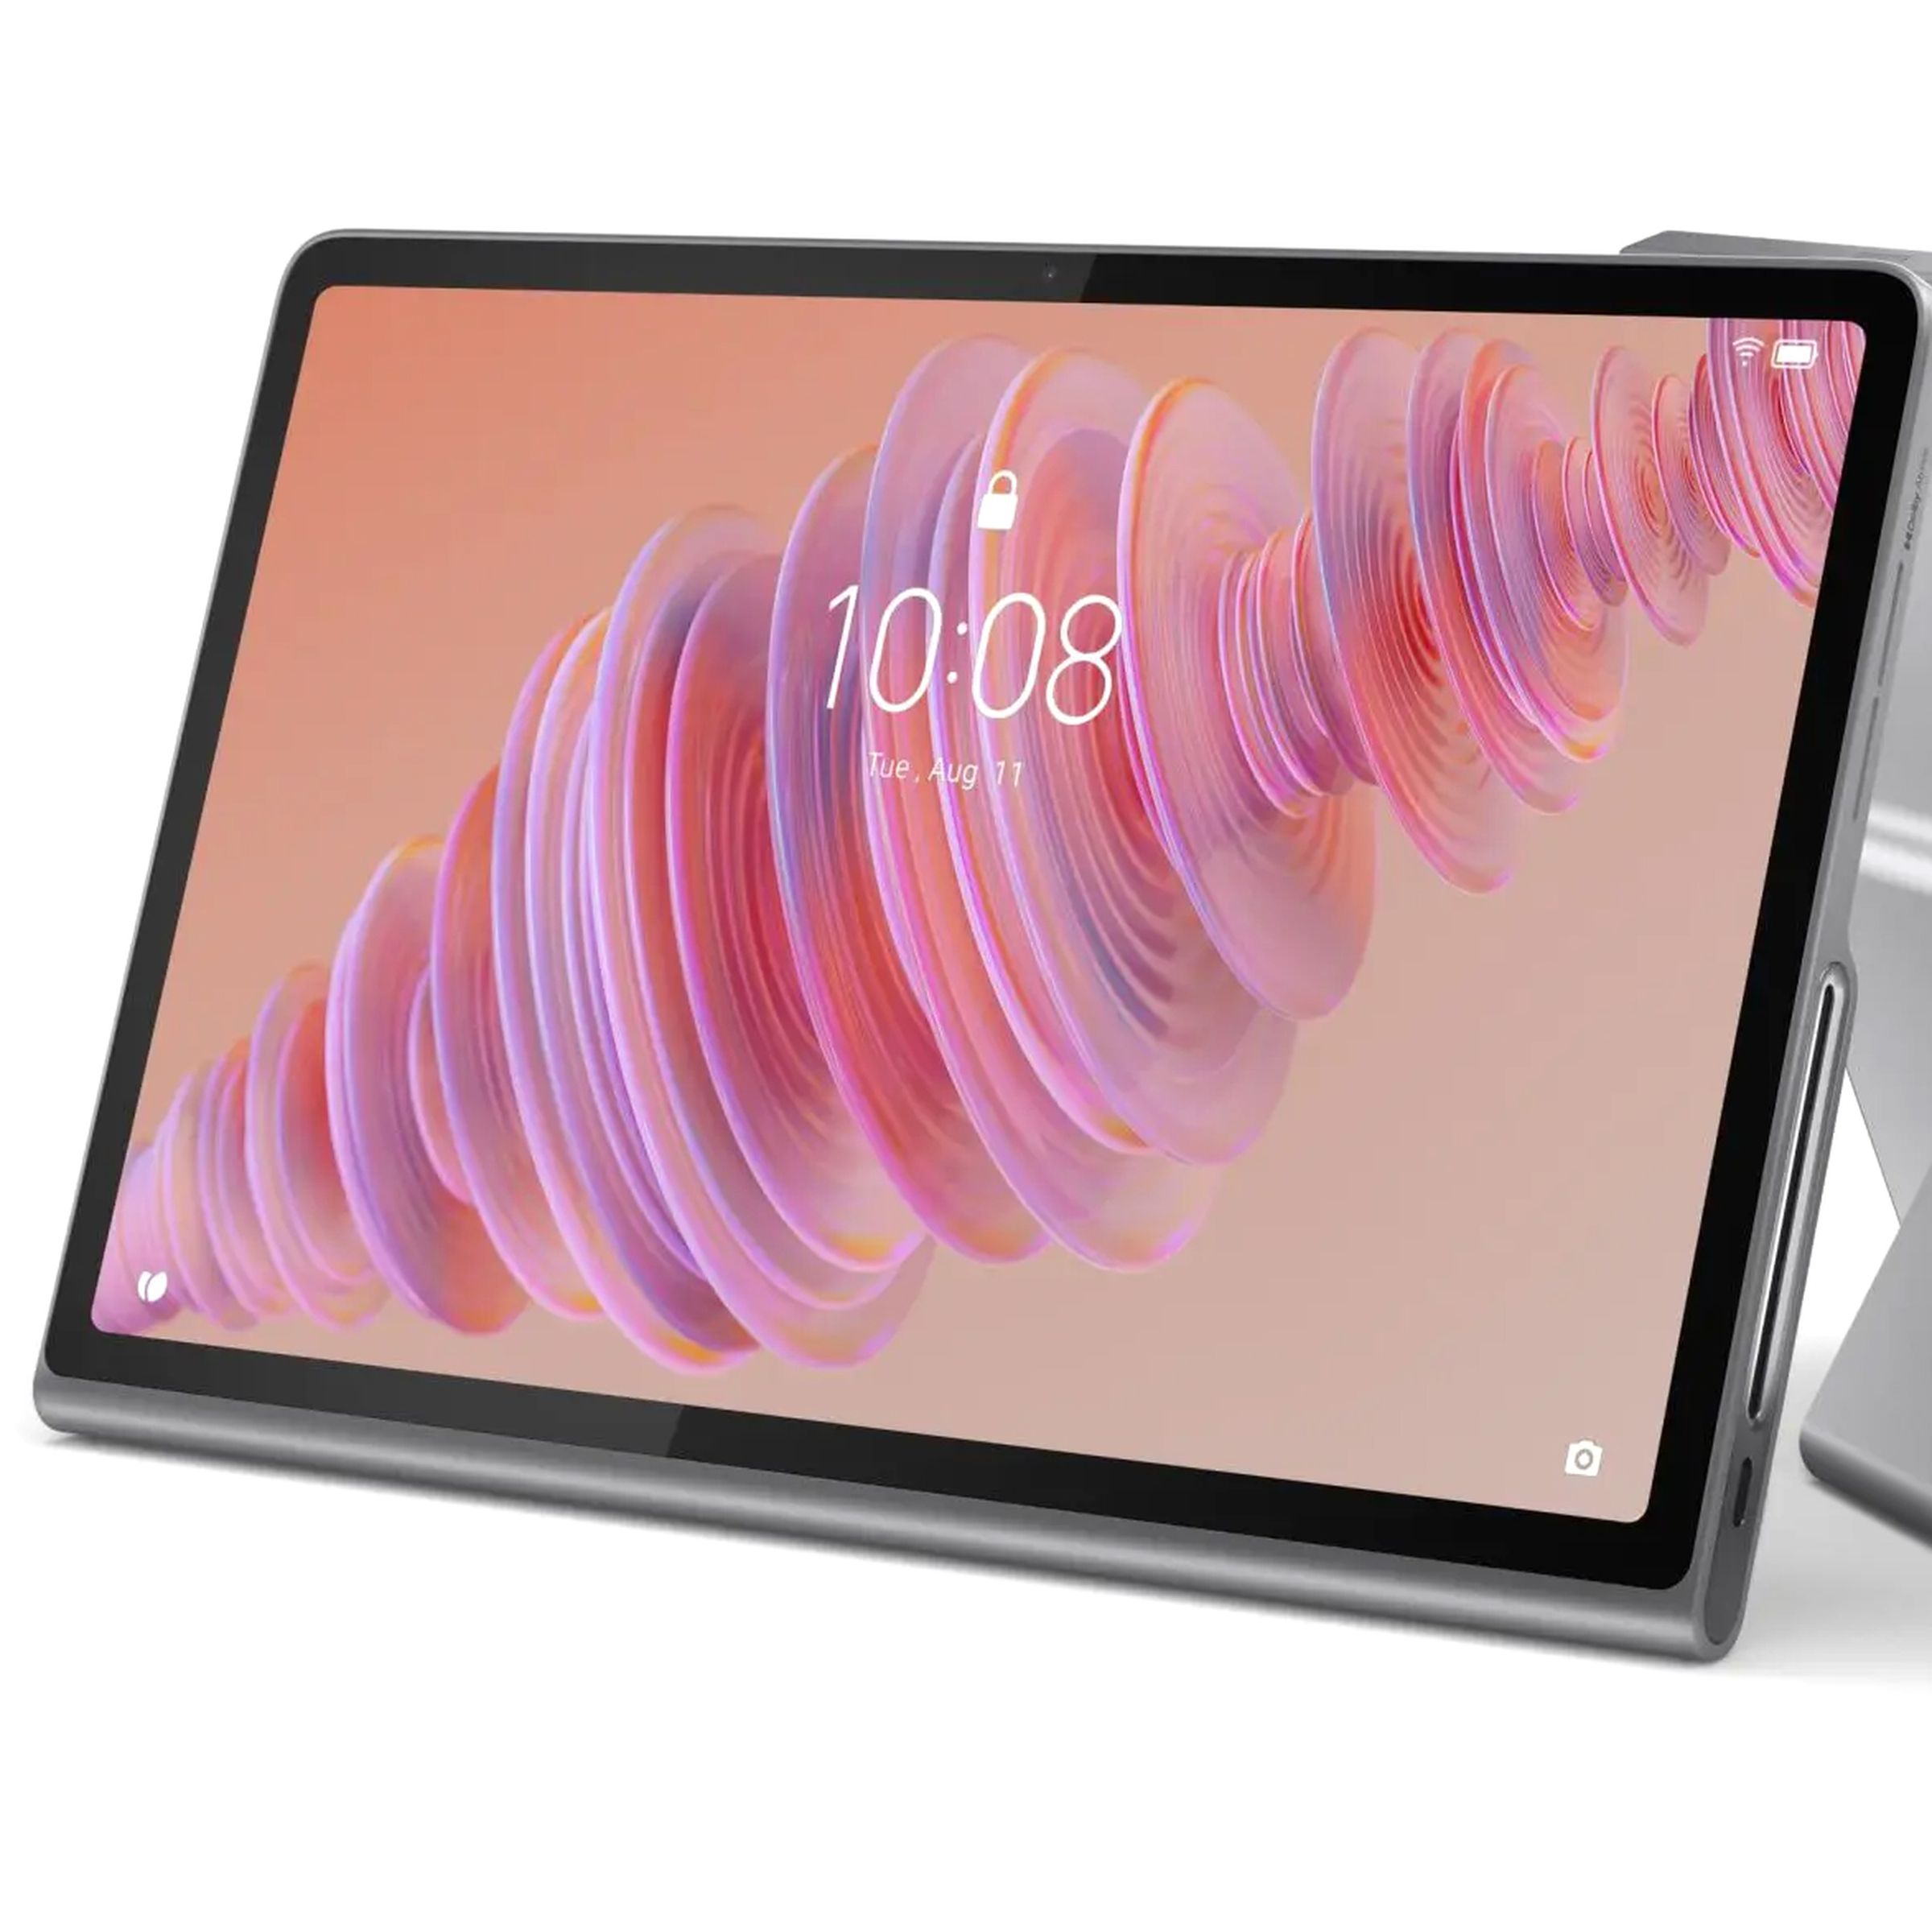 The Lenovo Tab Plus tablet seen from the front and back with the kickstand extended.